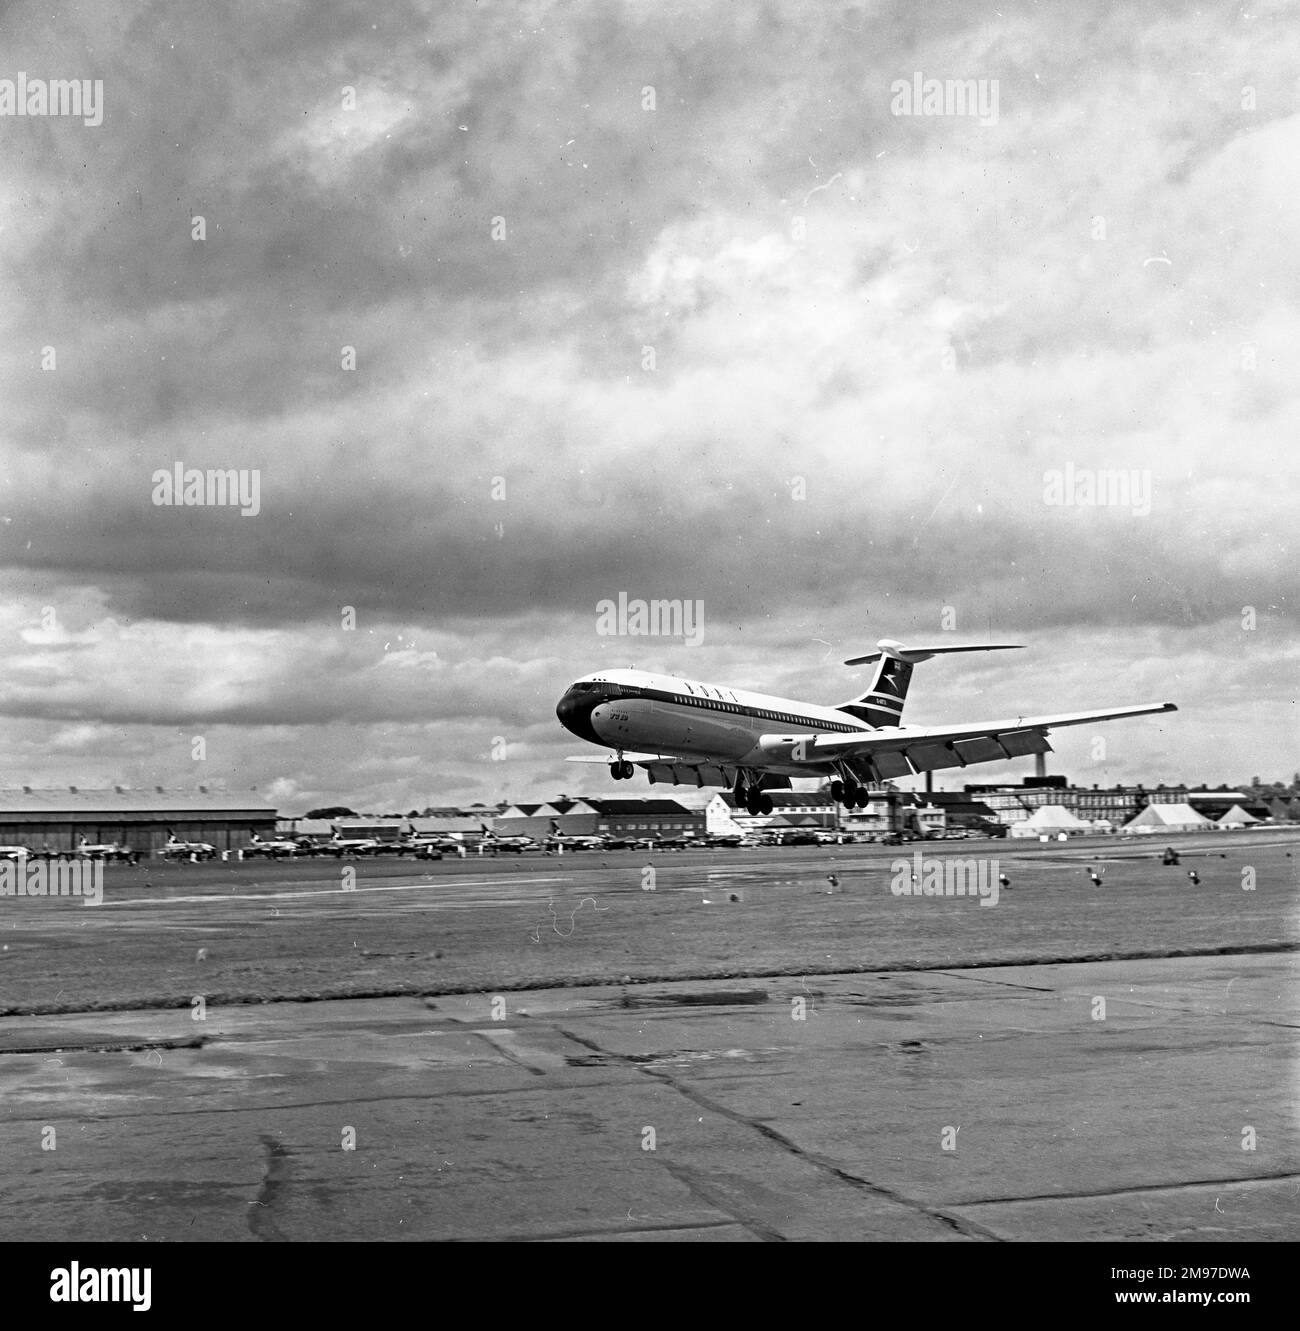 Vickers VC10 G-ARTA BOAC prototype taking off at first public appearance at Farnborough Air Show 6 September 1962 Stock Photo